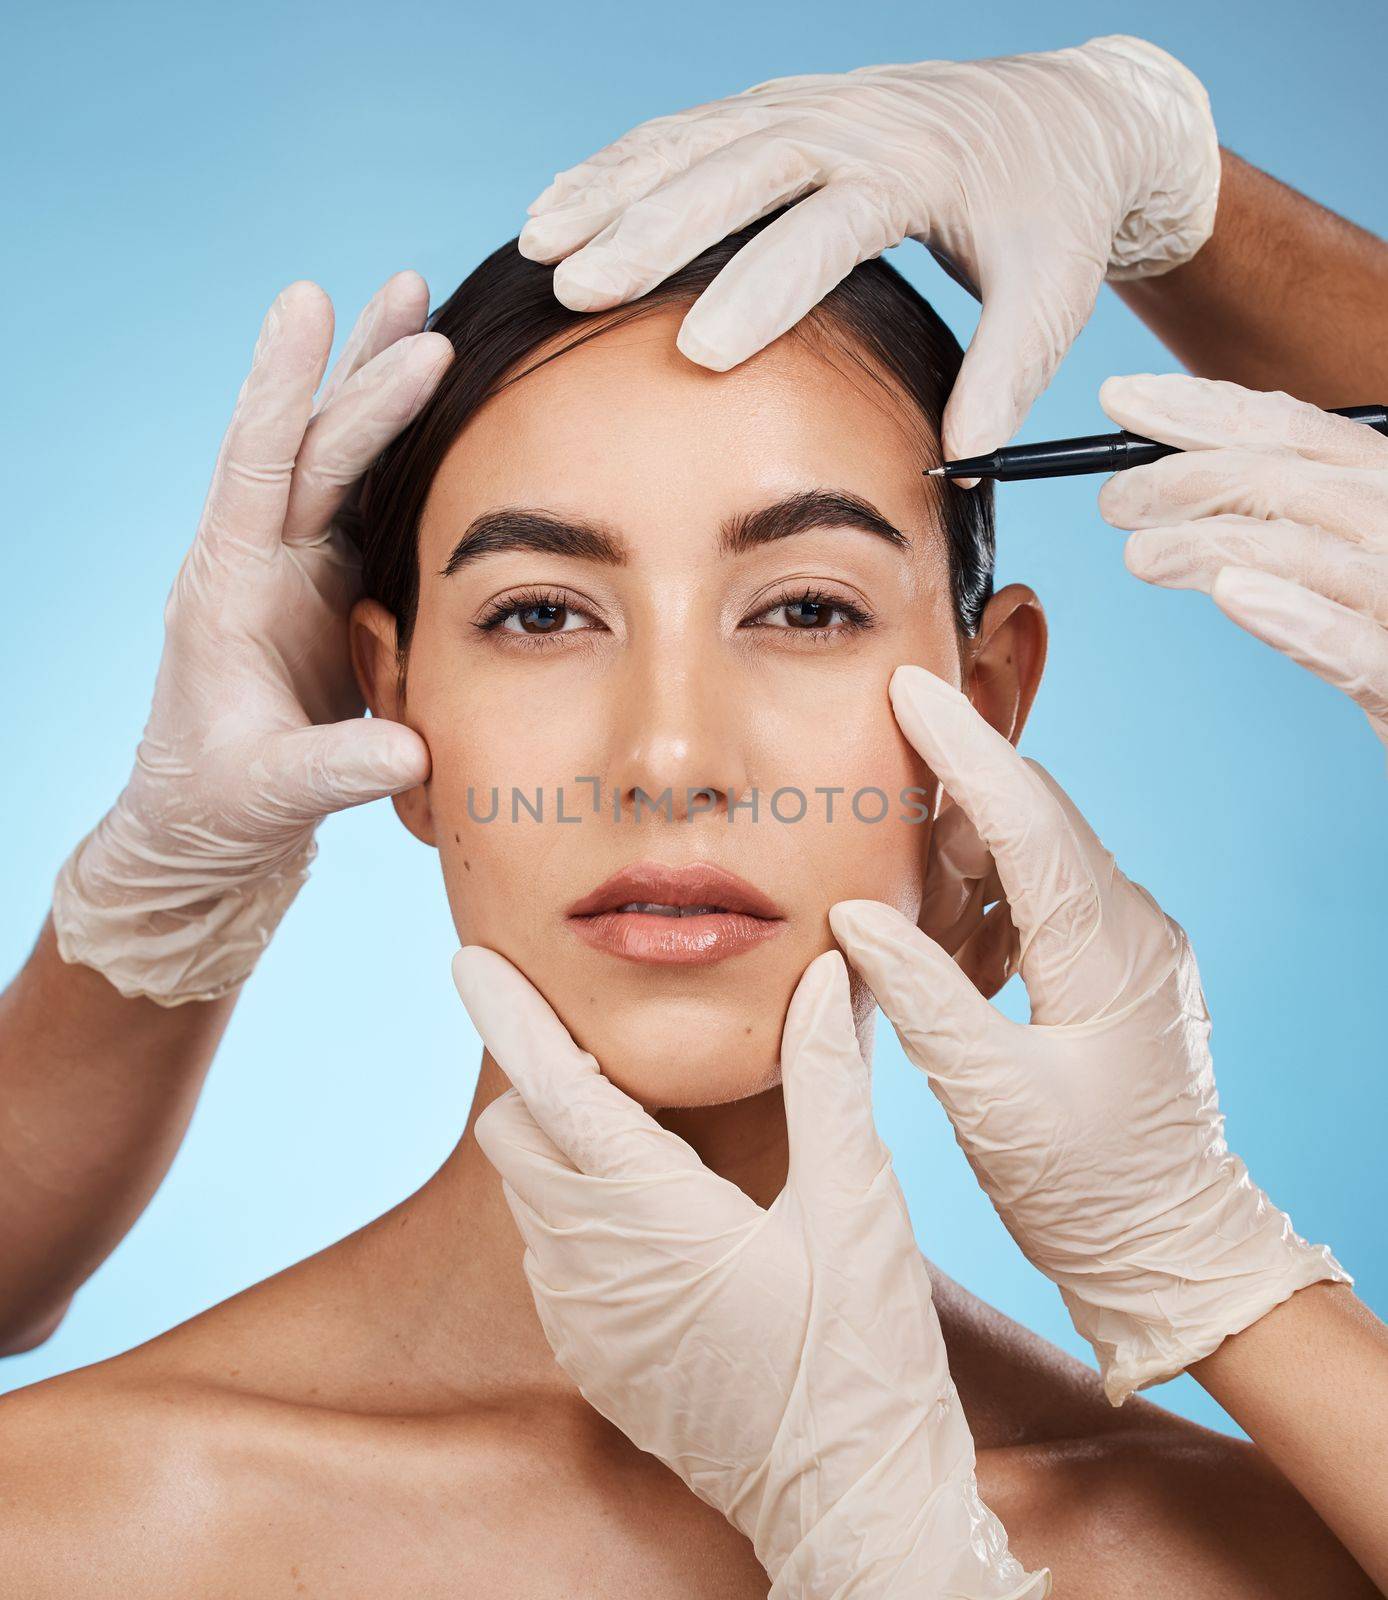 Beauty portrait, woman and plastic surgery hands, isolated on studio background for medical facial and aesthetic. Doctors, medical people for reconstruction or lines with pen on model or person face.